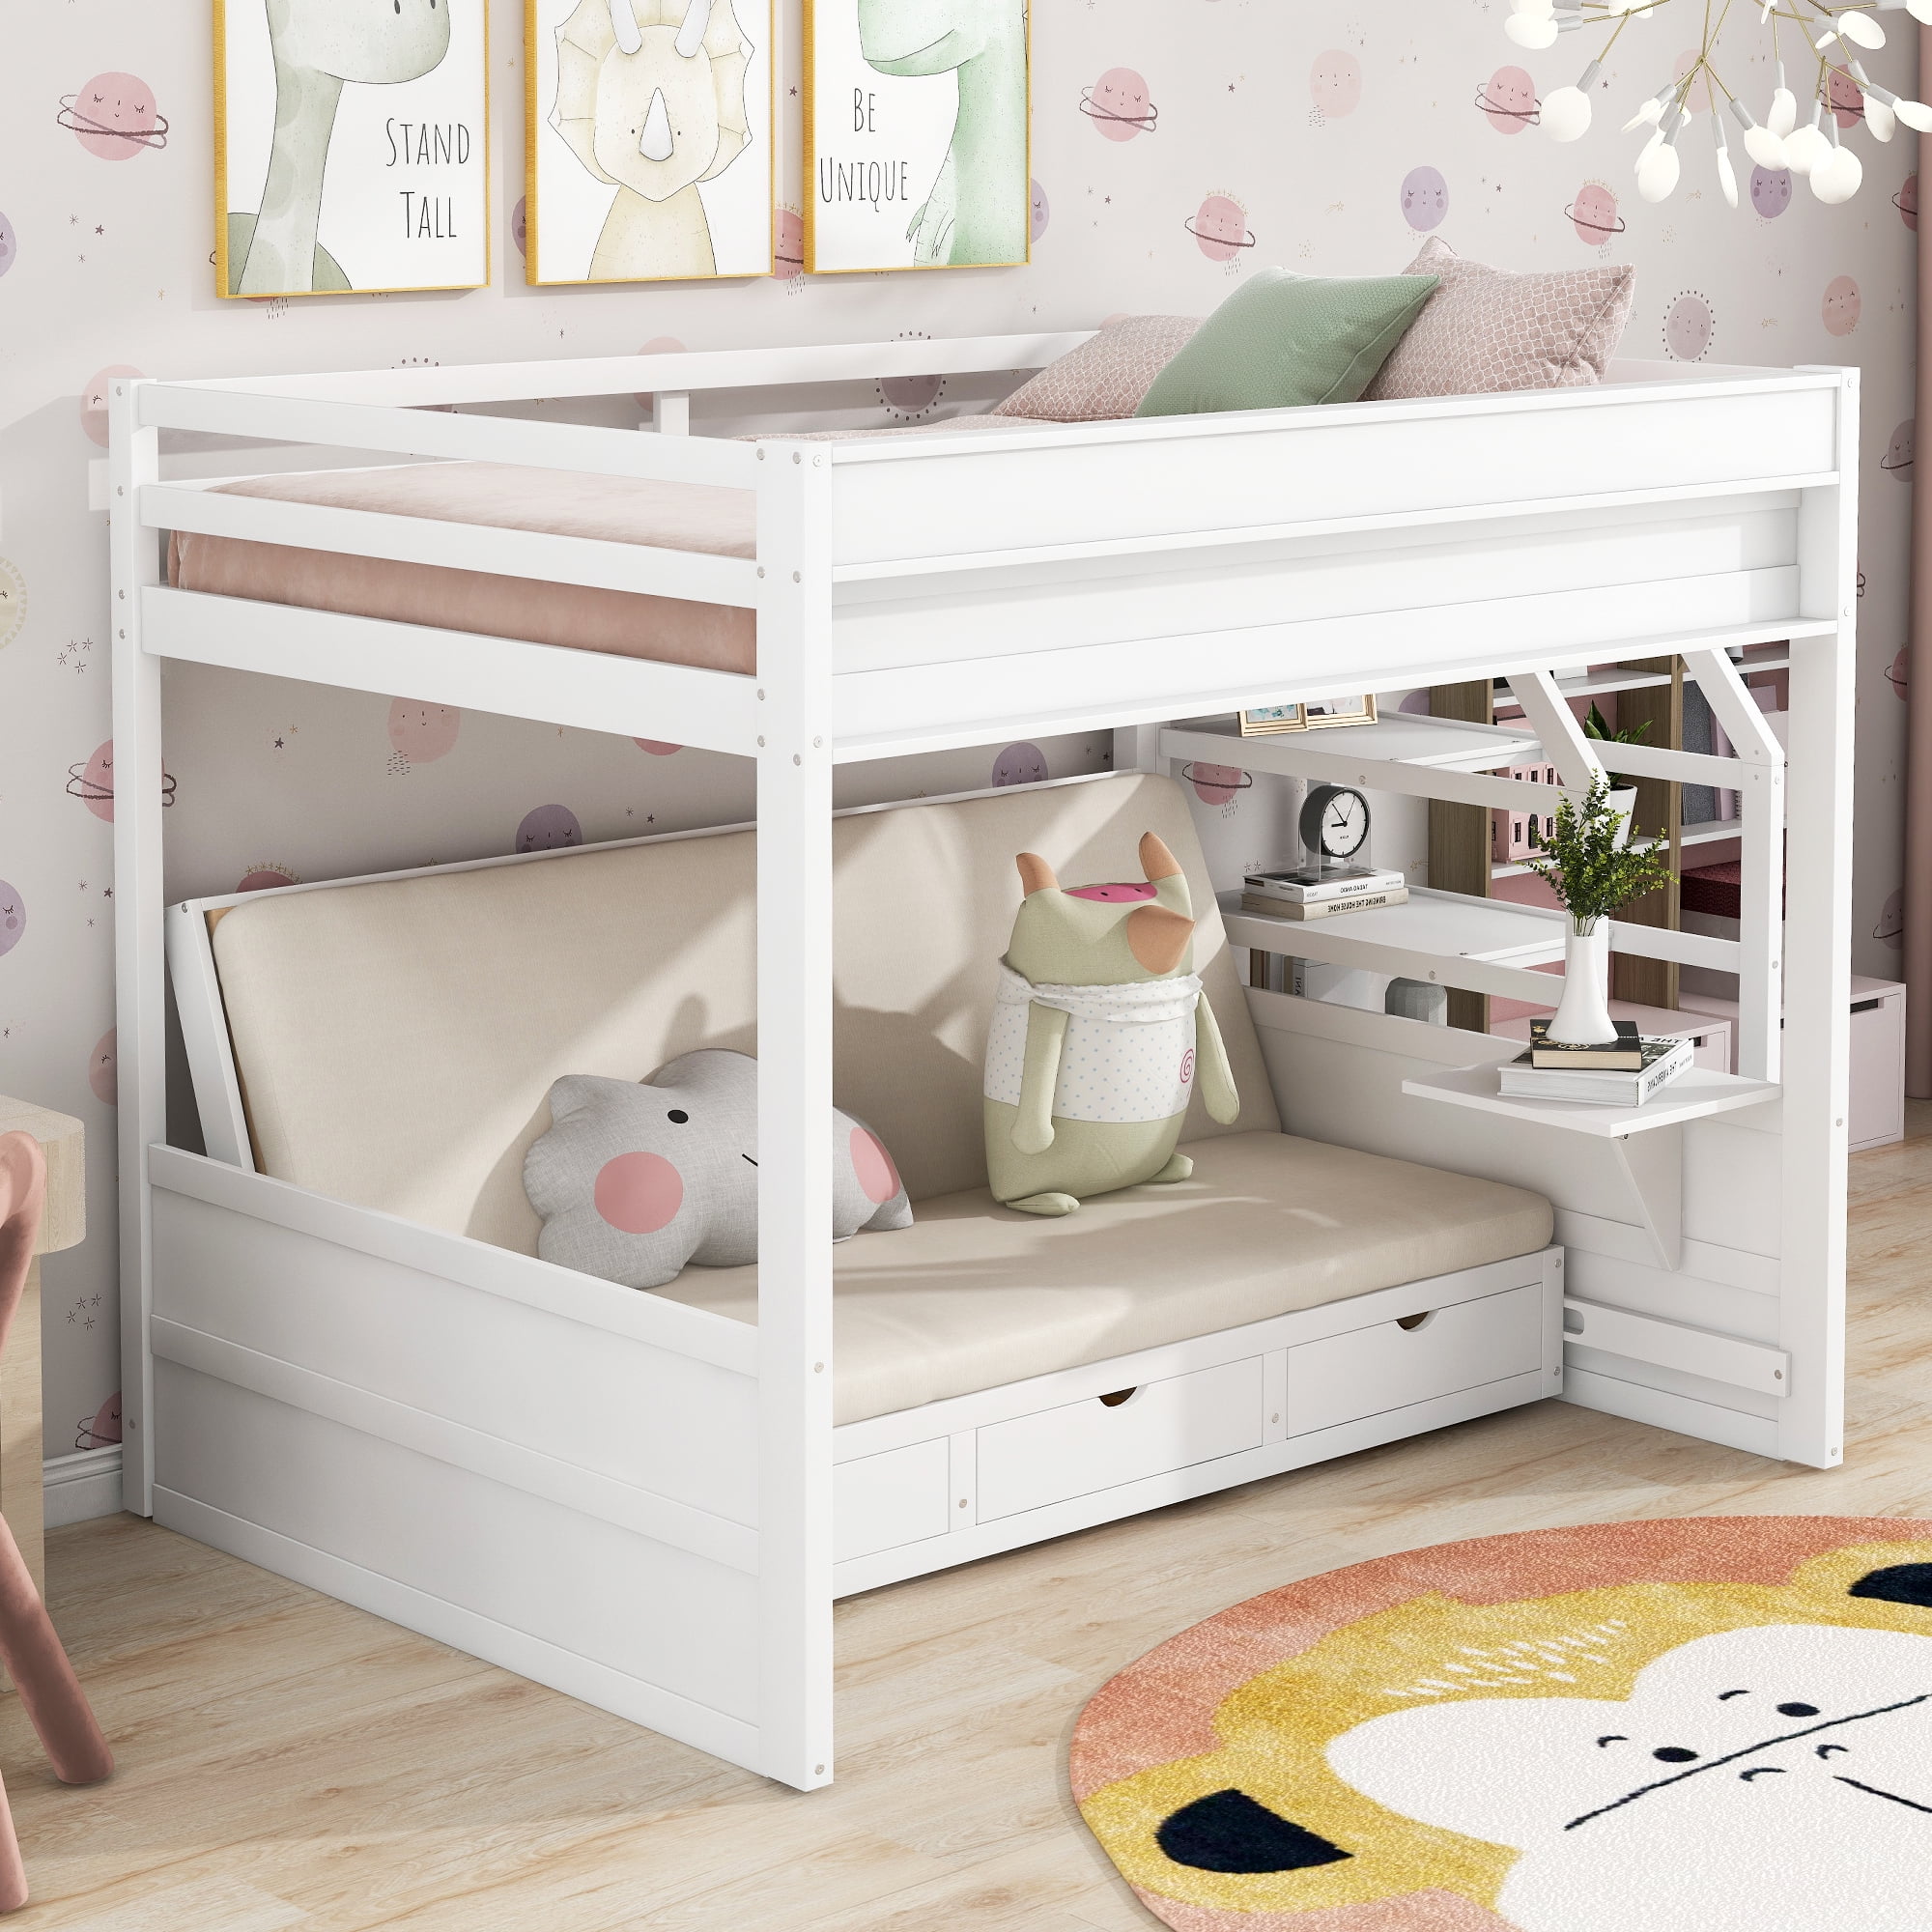 Toddlers Beds - Kids Bunk Beds, Single Beds & More - IKEA CA